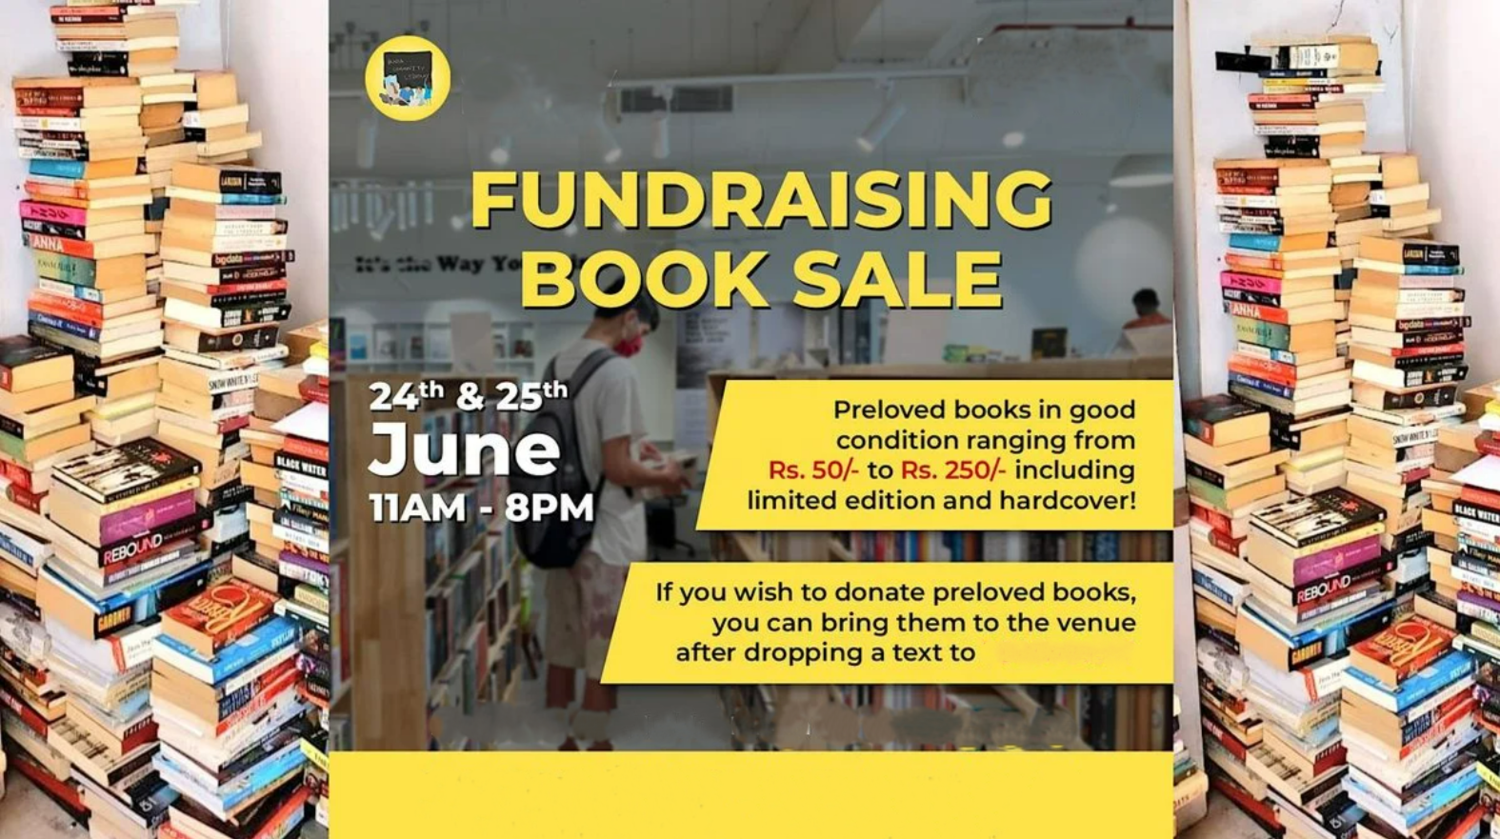 Fundraising Sales in library